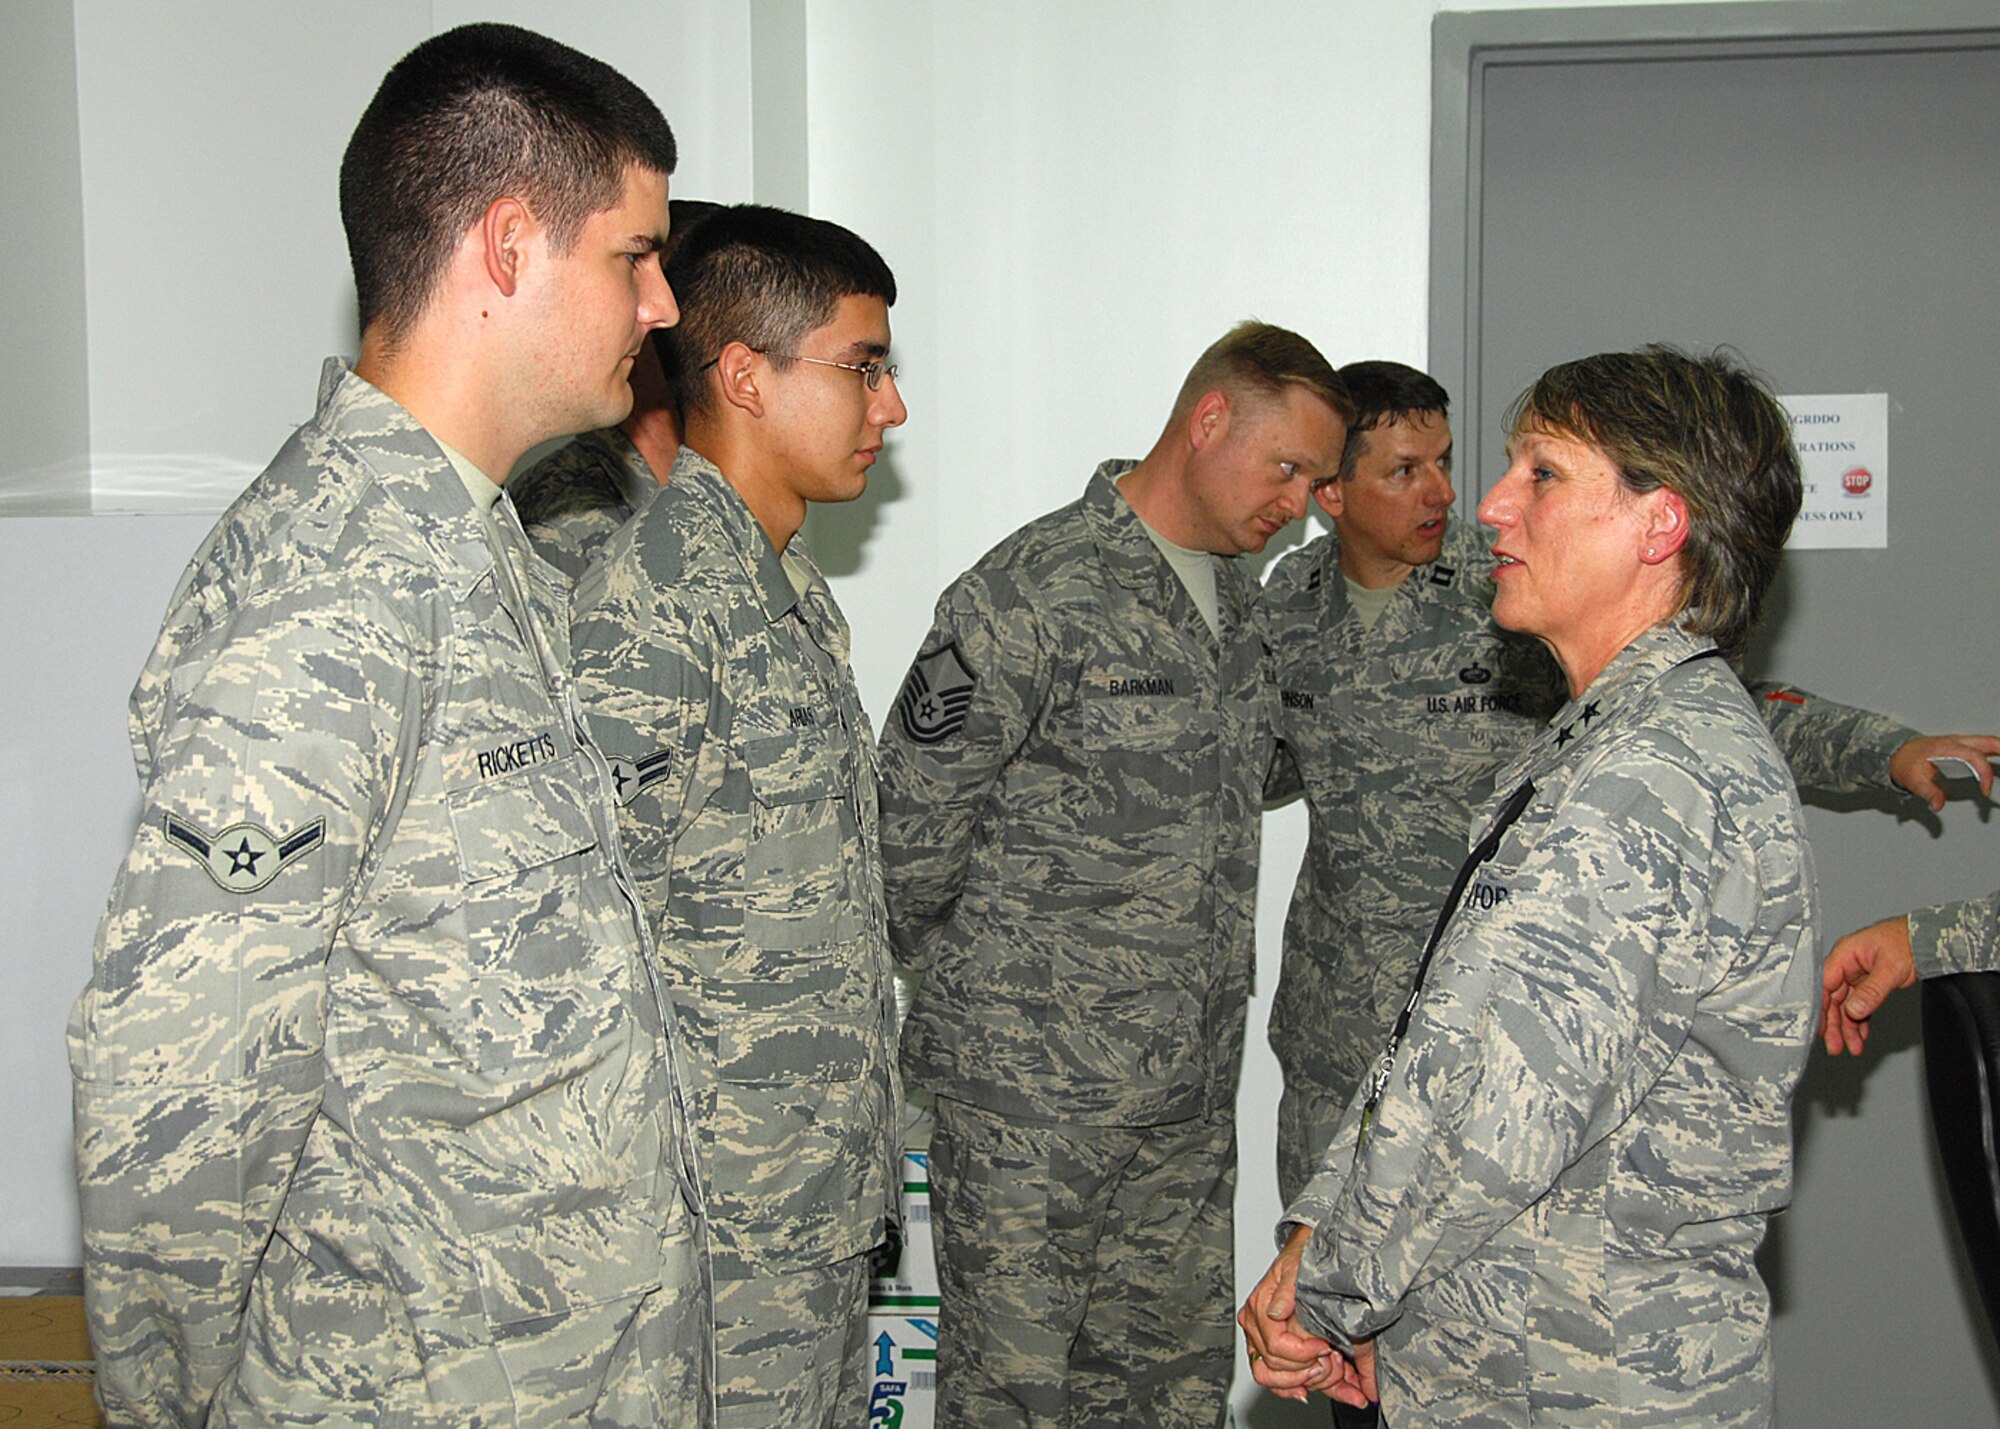 SOUTHWEST ASIA -- Maj. Gen. K. C. McClain, commander of the Air Force Personnel Center at Randolph Air Force Base, Texas, visits with Airmen of the 386th Air Expeditionary Wing on Aug. 25 at an air base in Southwest Asia. During Gen. McClain’s visit, she toured the 386th Expeditionary Mission Support Group, Army Life Support Area, Deployment Control Center and the 586th Air Expeditionary Group at Camp Bucca, Iraq to get a firsthand feel of any personnel issues at bases in the U.S. Central Command area of responsibility. (U.S. Air Force photo/Tech. Sgt. Raheem Moore)  